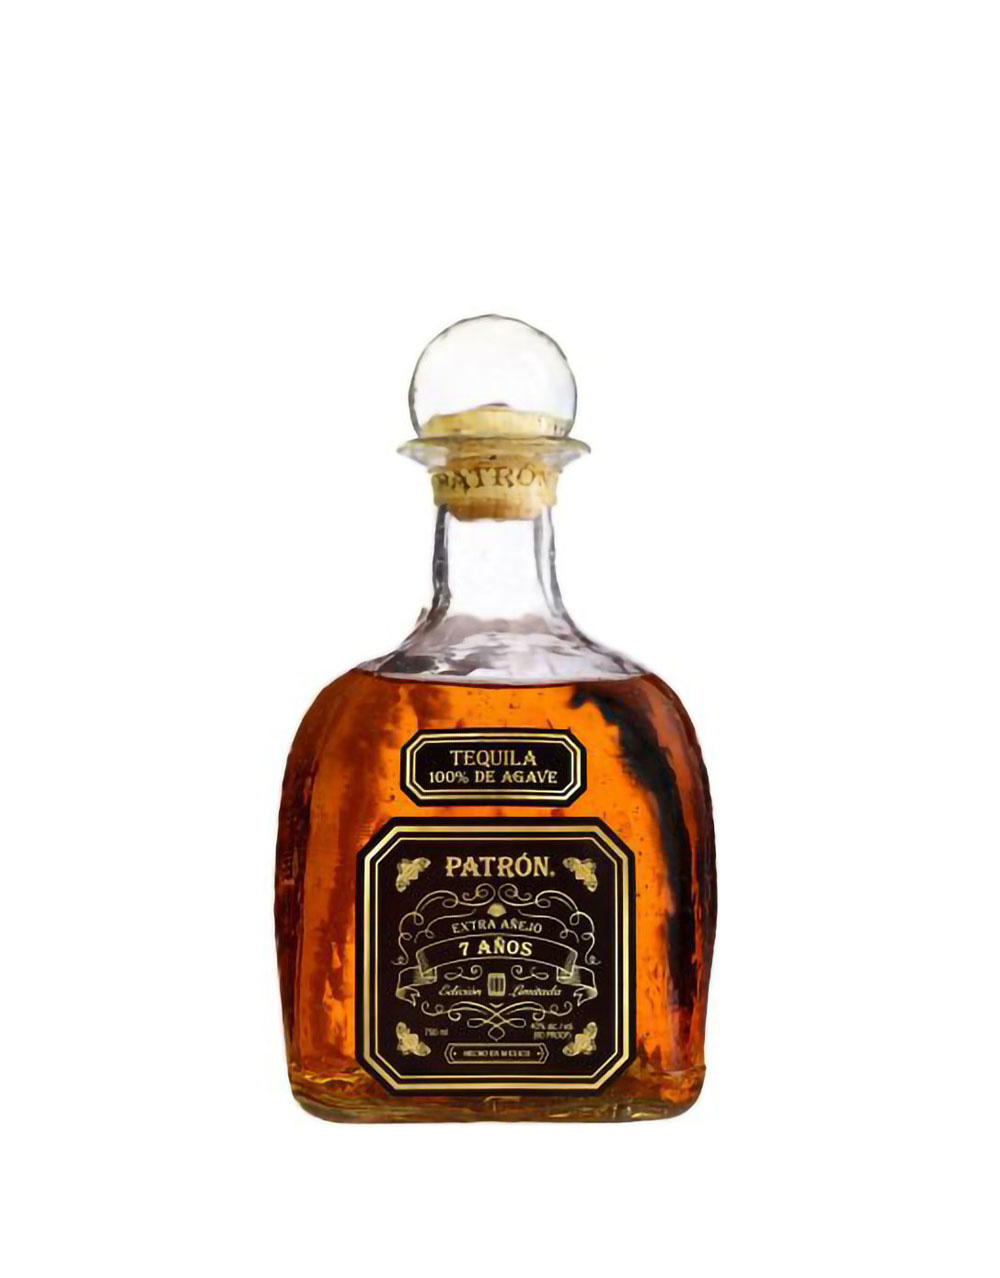 Patron Extra Anejo 7 Anos Limited Edition